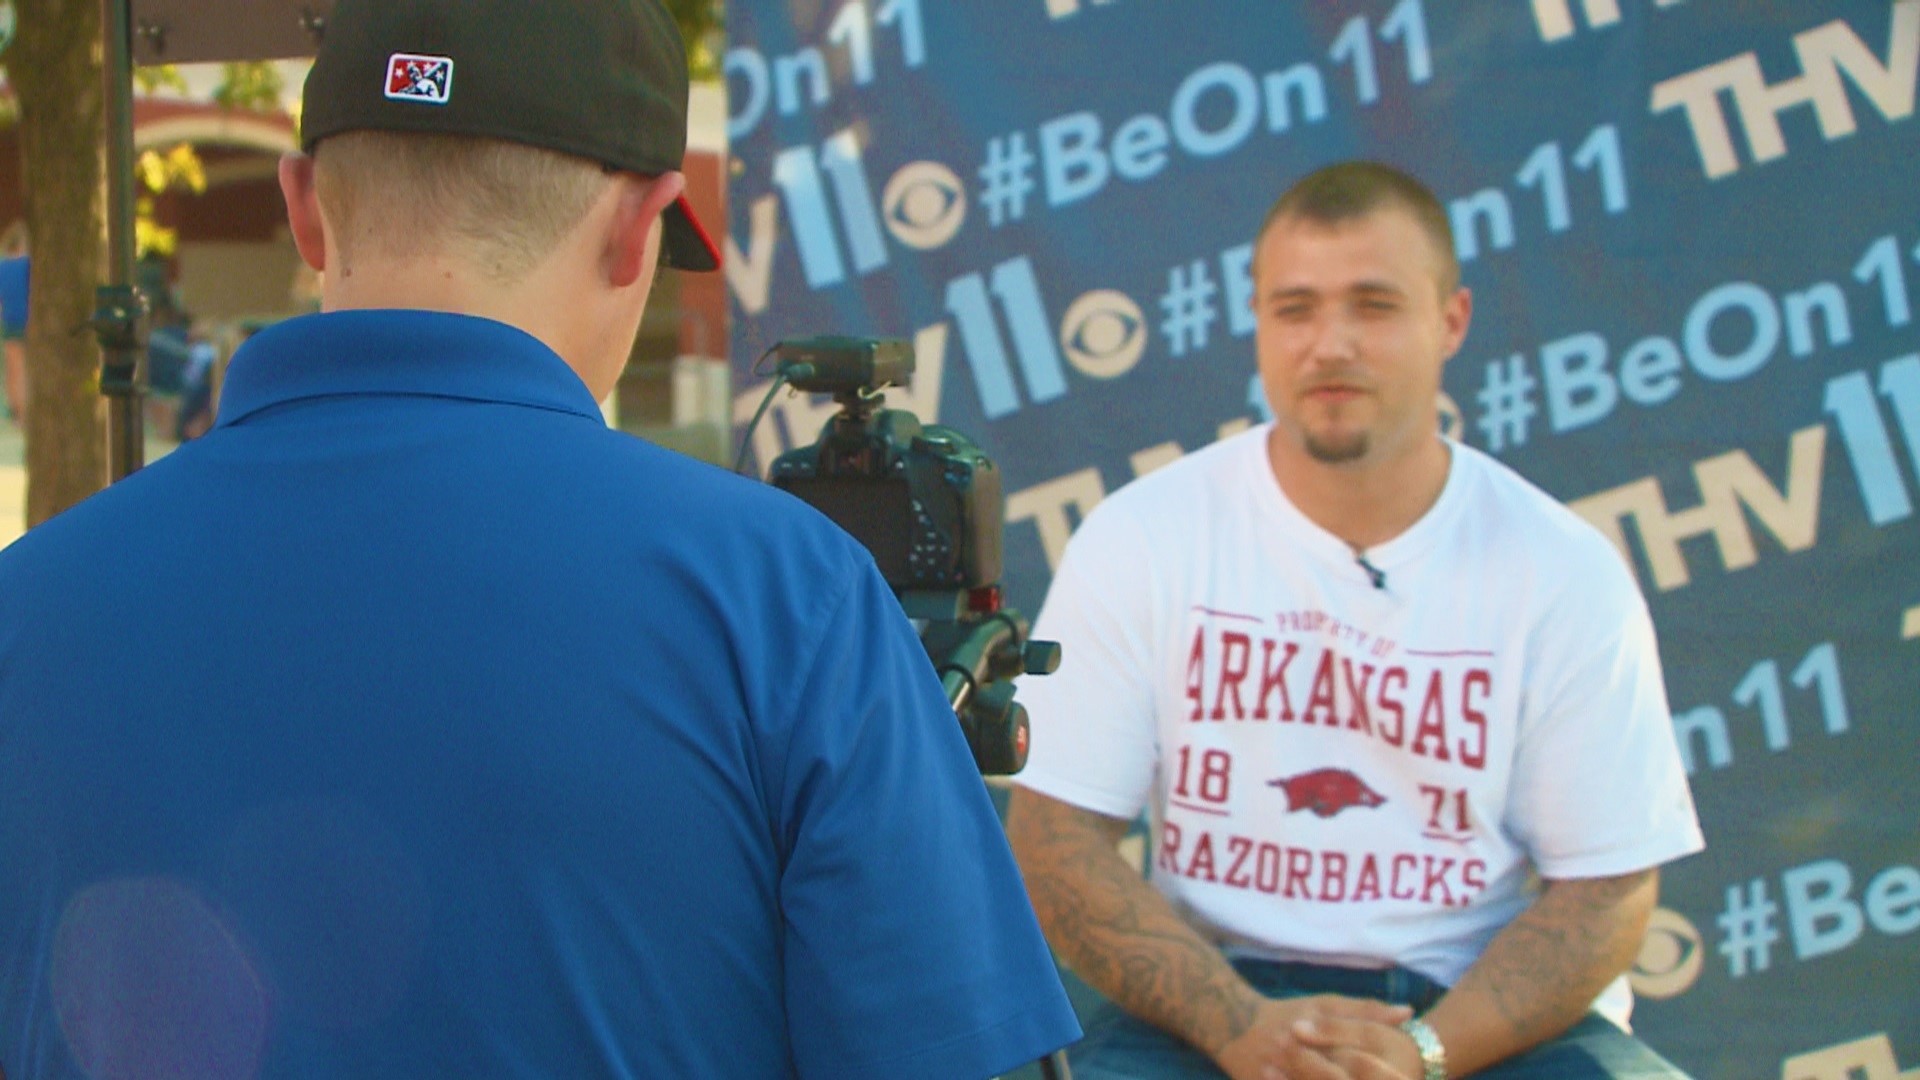 THV11 hosted Recovery Night at the Travs -- an event aimed at celebrating recovery from addiction and our continuing effort to help save a generation. We invited people to share their stories of recovery with us.